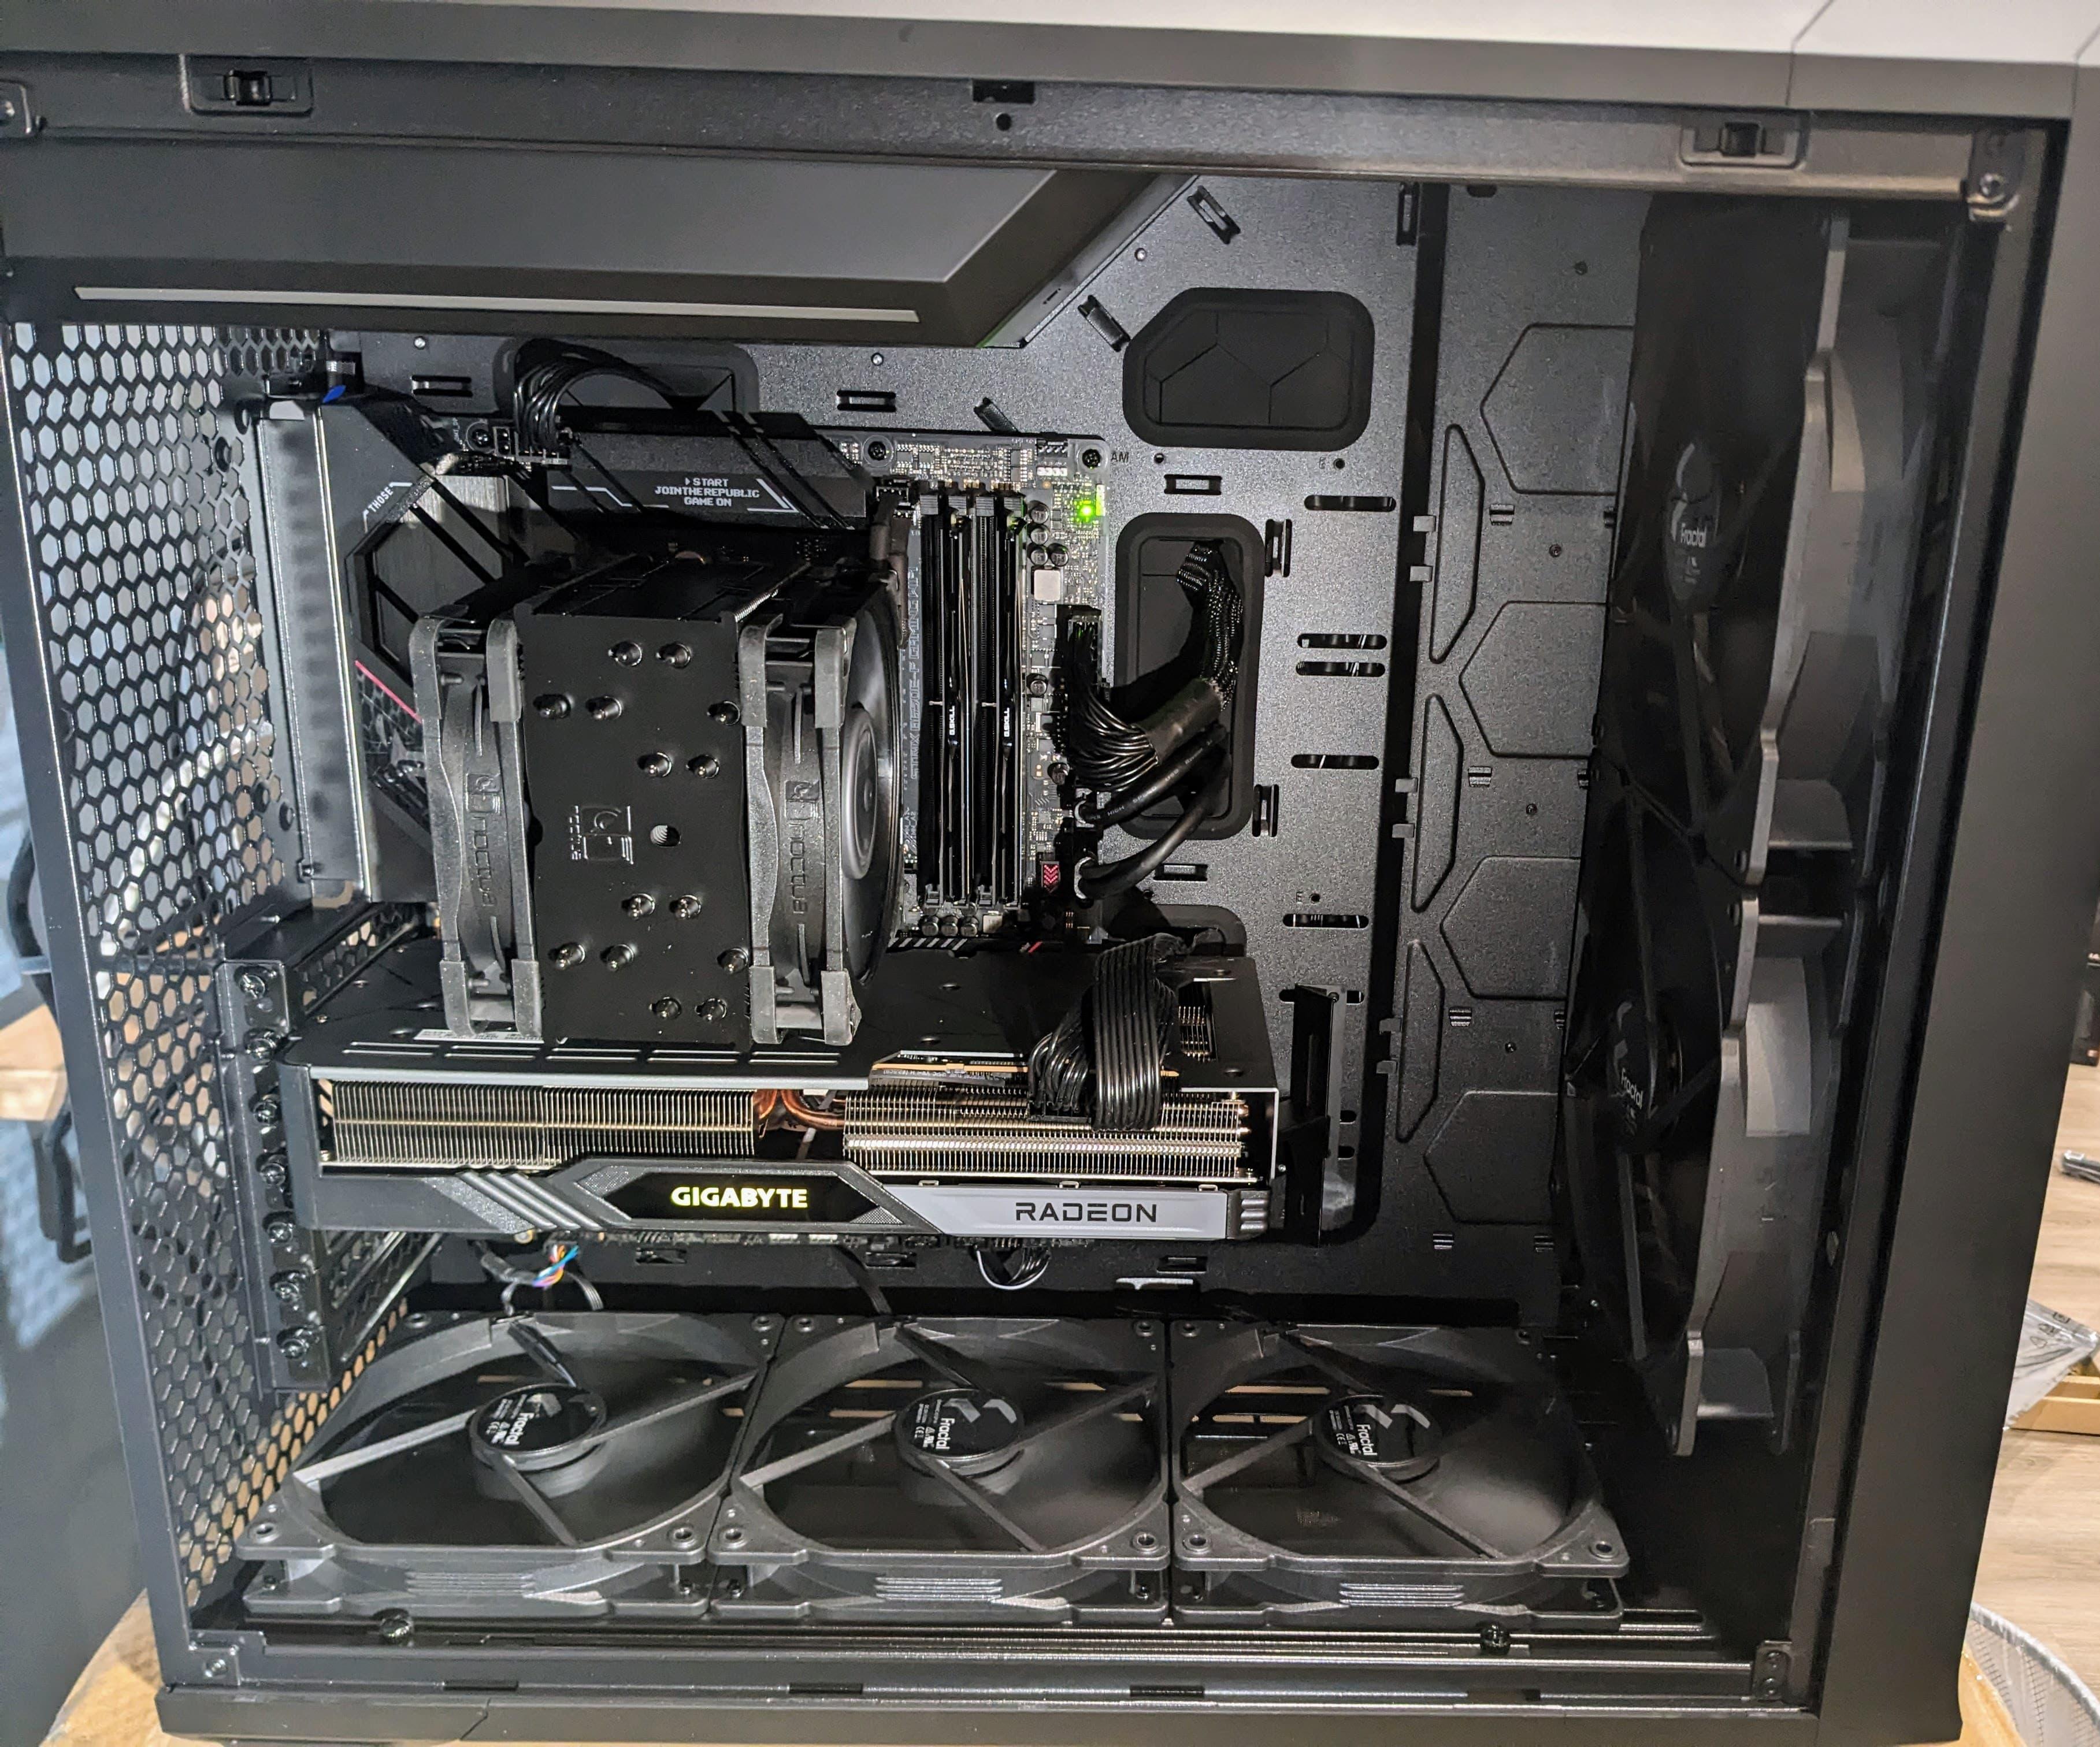 the completed build